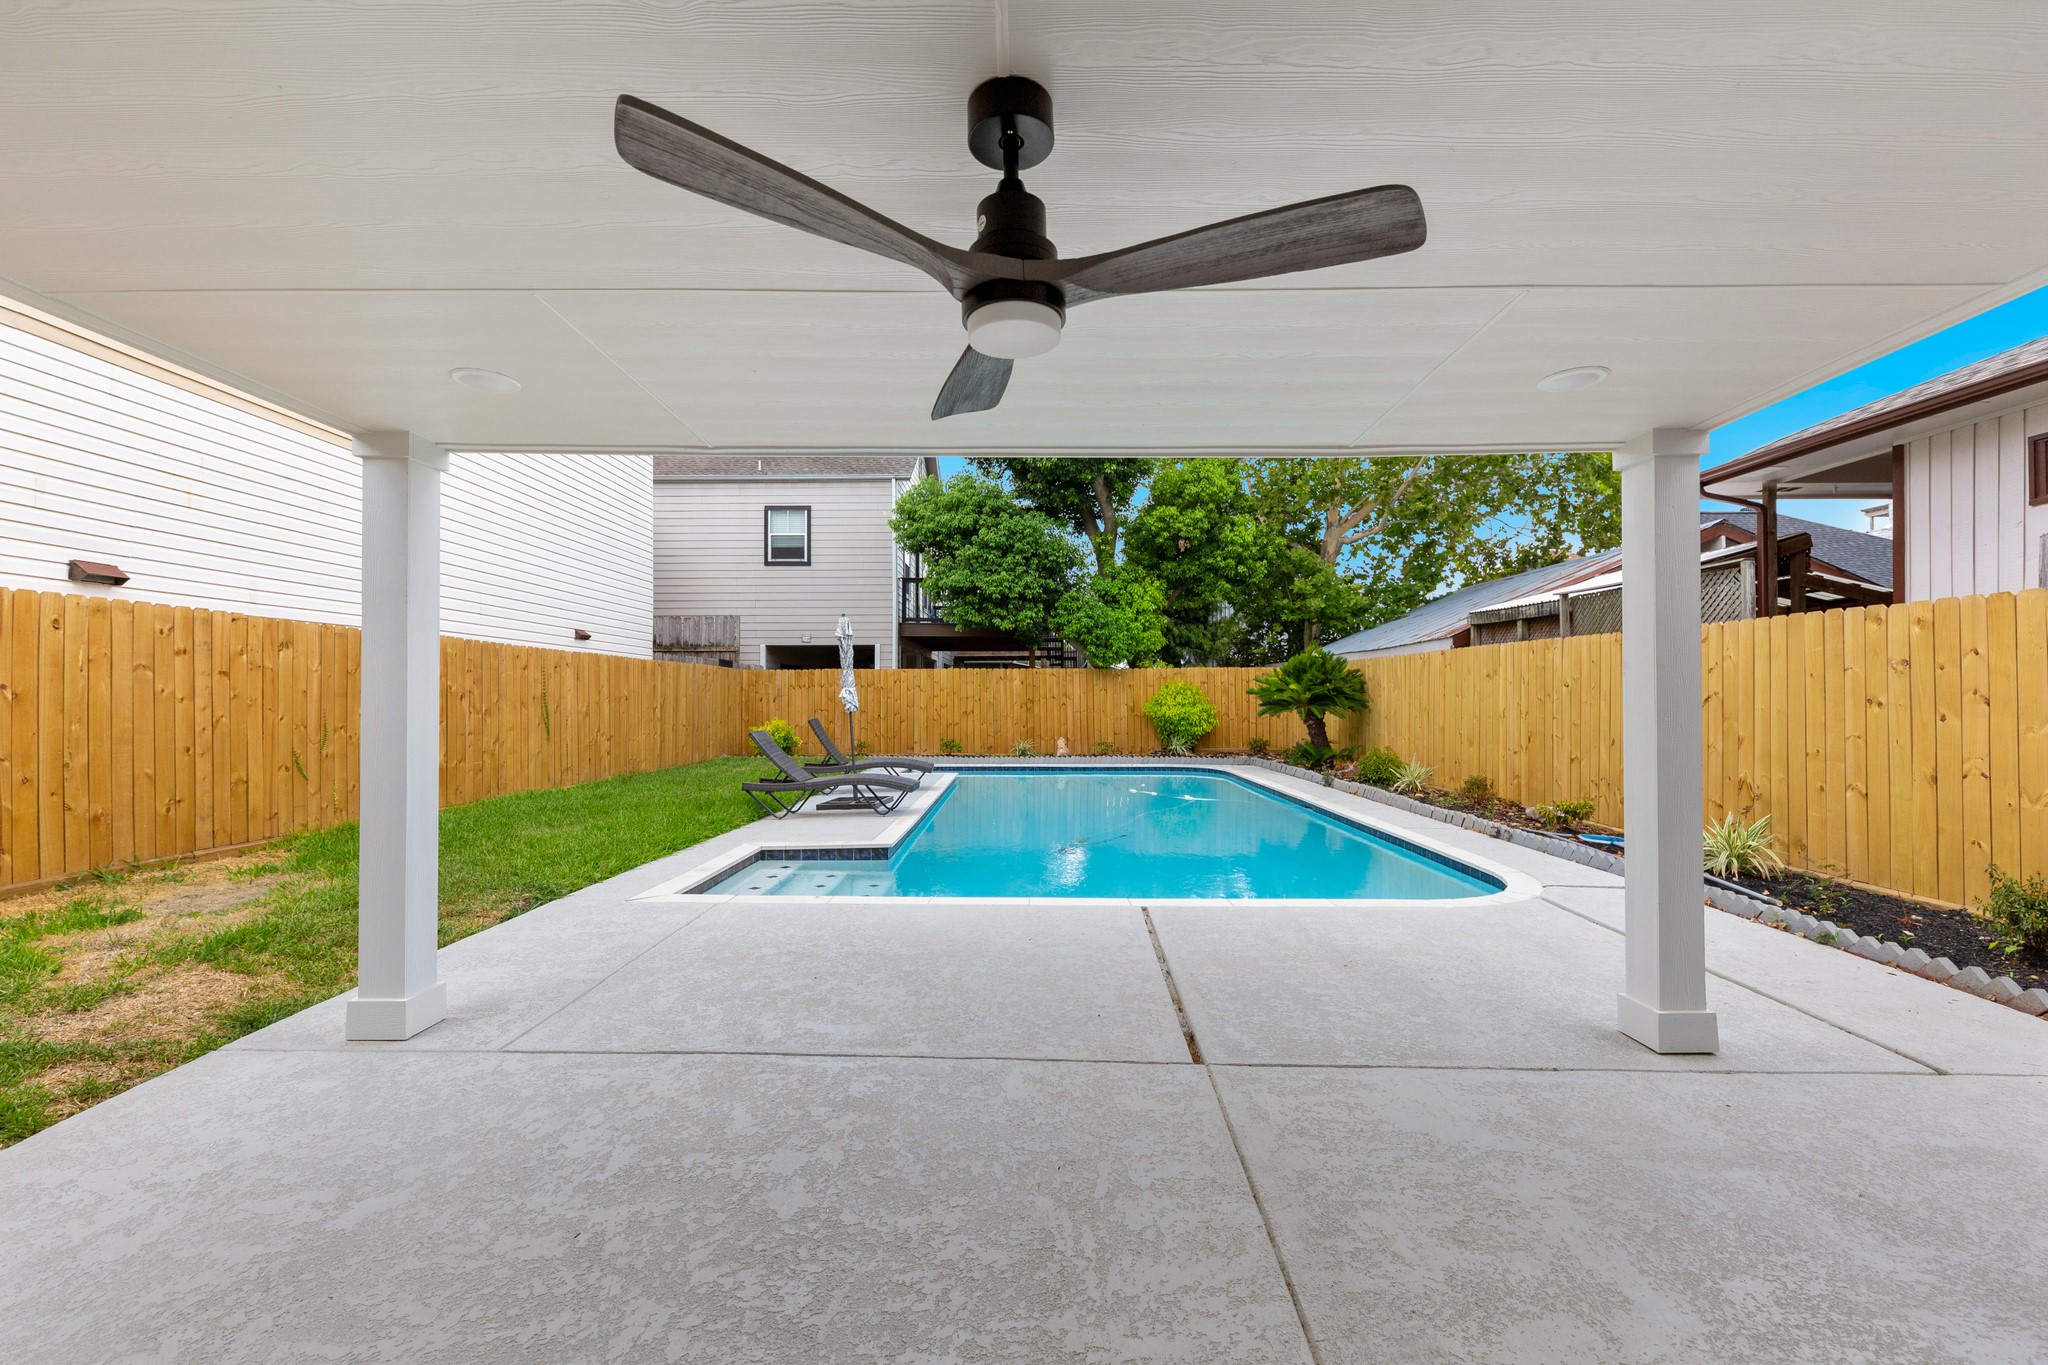 Covered back patio perfect for comfy patio furniture overlooking sparkling pool